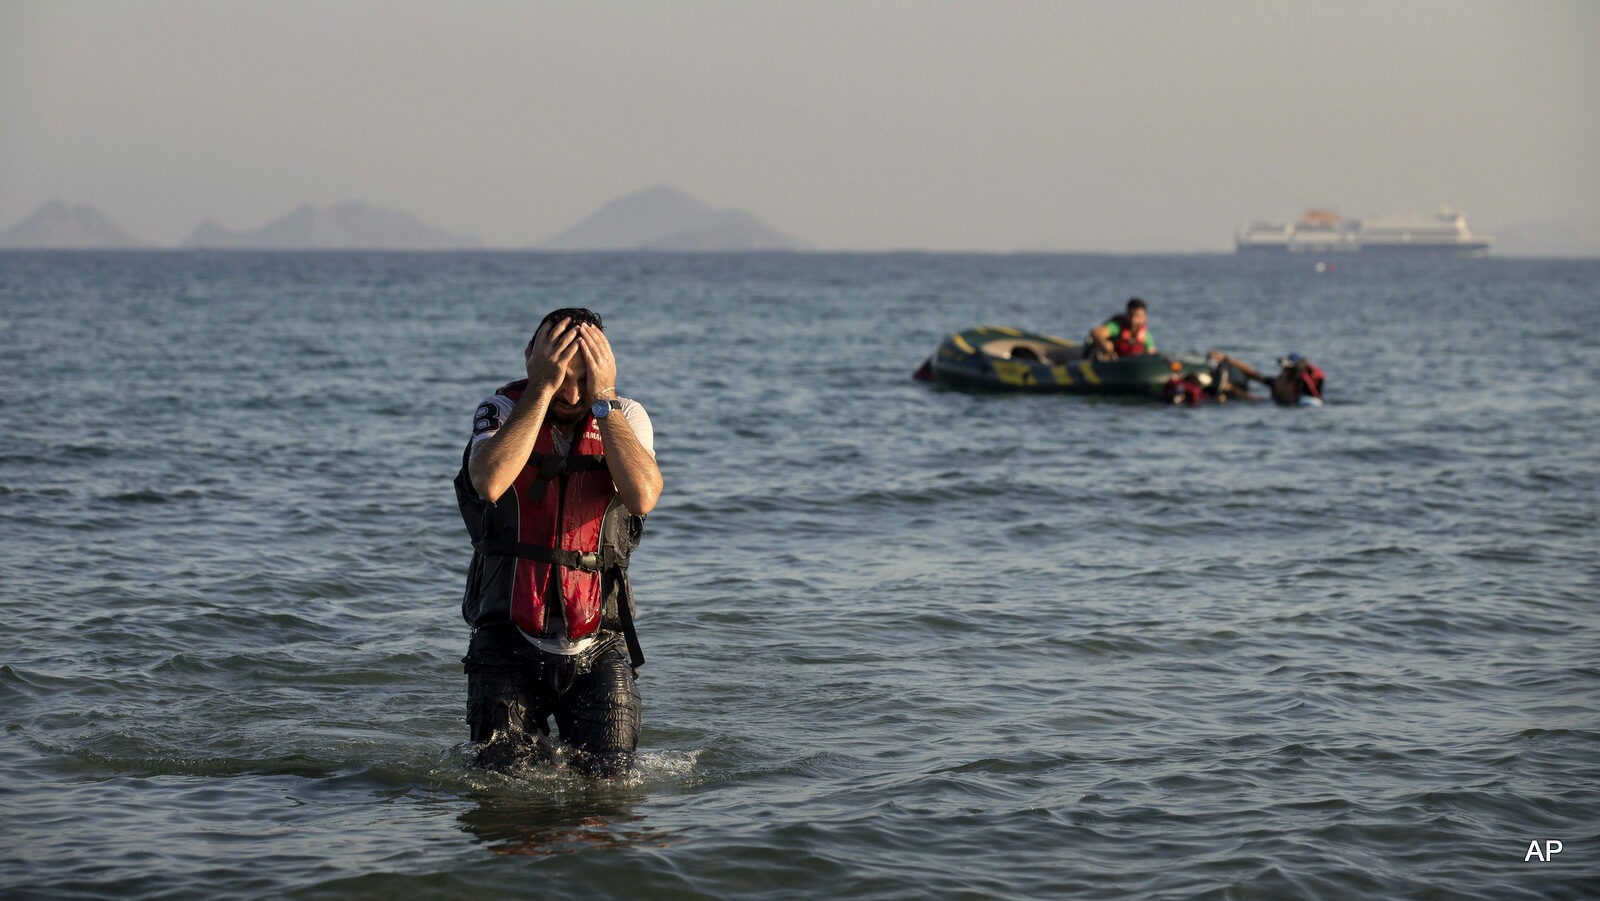 A Syrian Refugee arrives after crossing from Turkey by a rubber boat, seen in the background, in the southeastern island of Kos, Greece